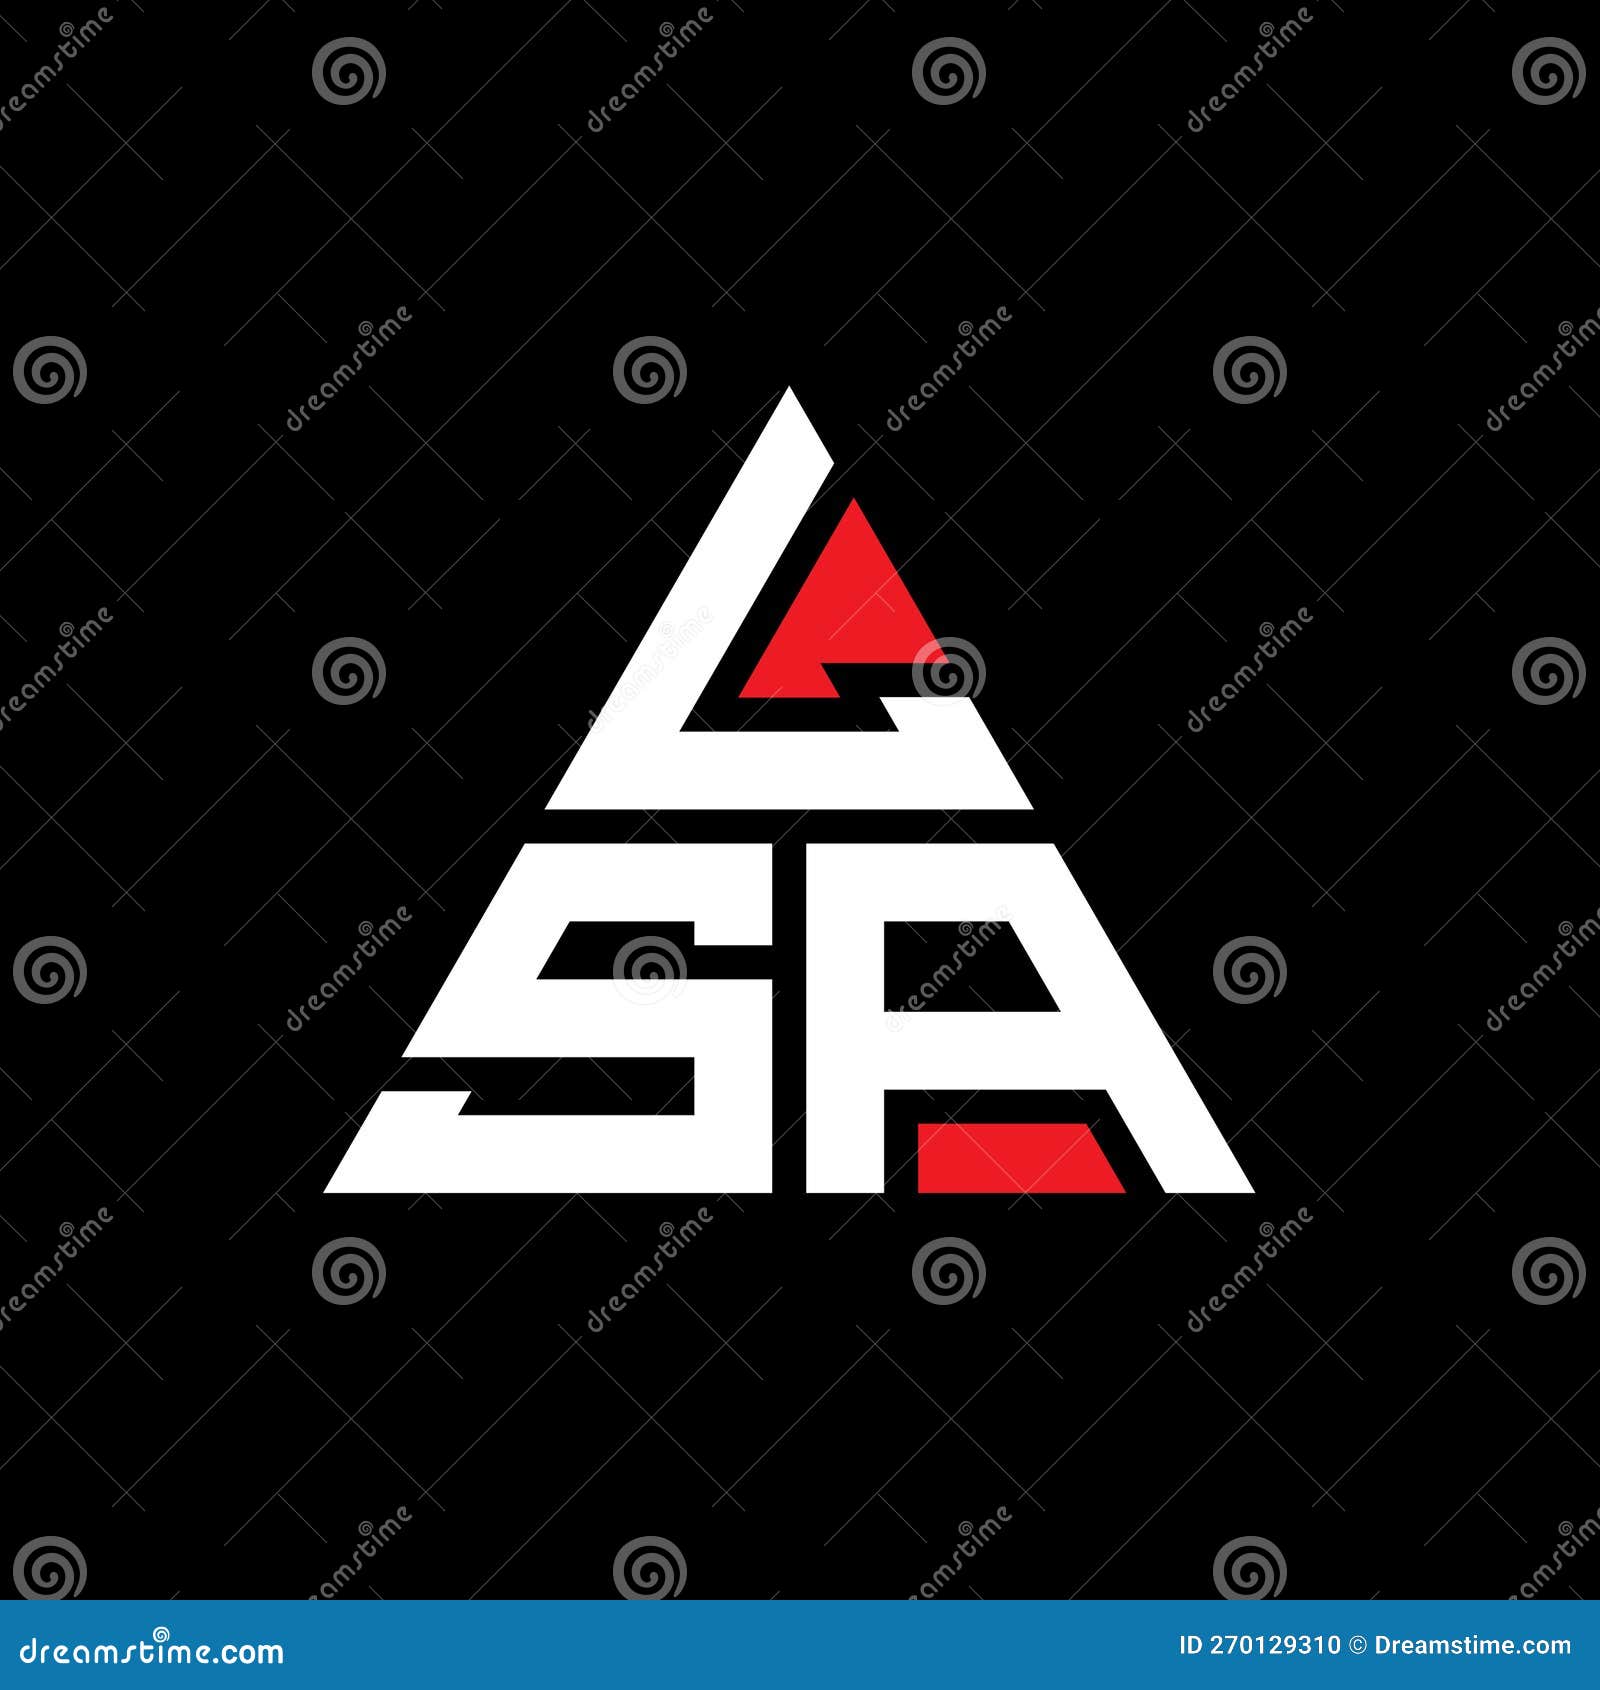 lsa triangle letter logo  with triangle . lsa triangle logo  monogram. lsa triangle  logo template with red